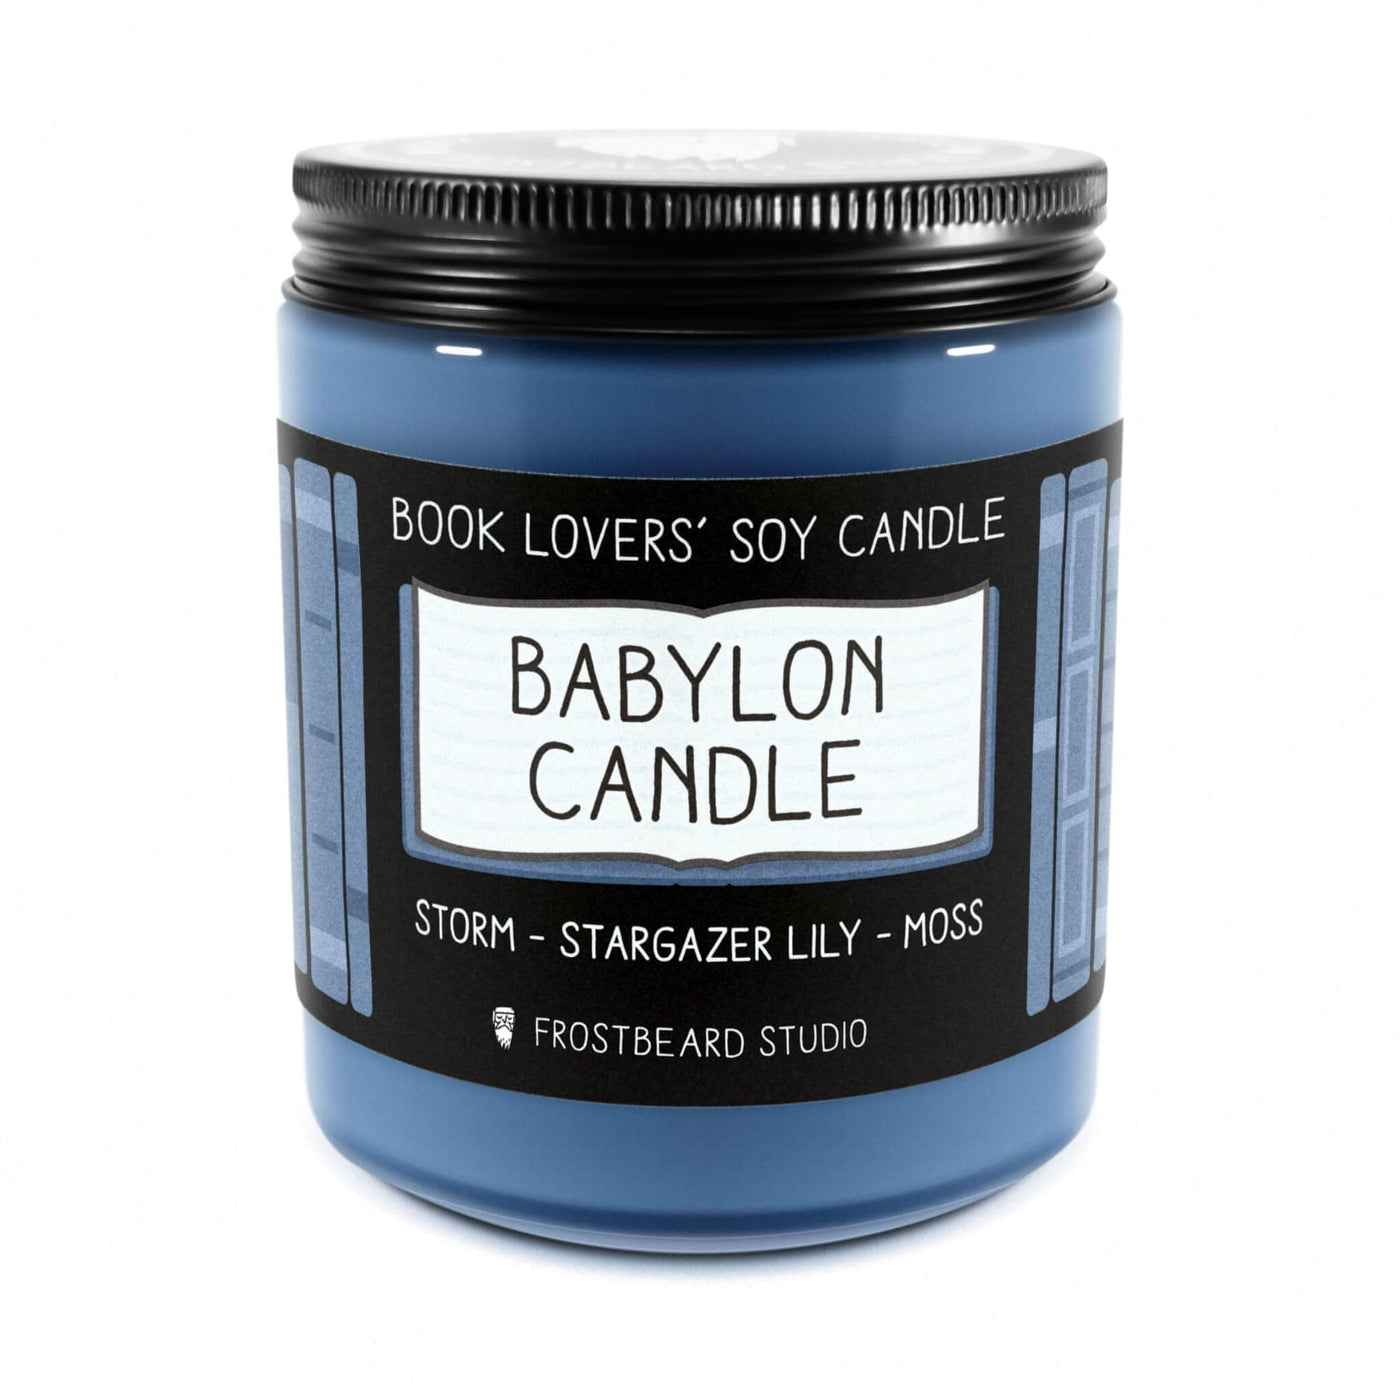 Babylon Candle  -  8 oz Jar  -  Book Lovers' Soy Candle  -  Frostbeard Studio